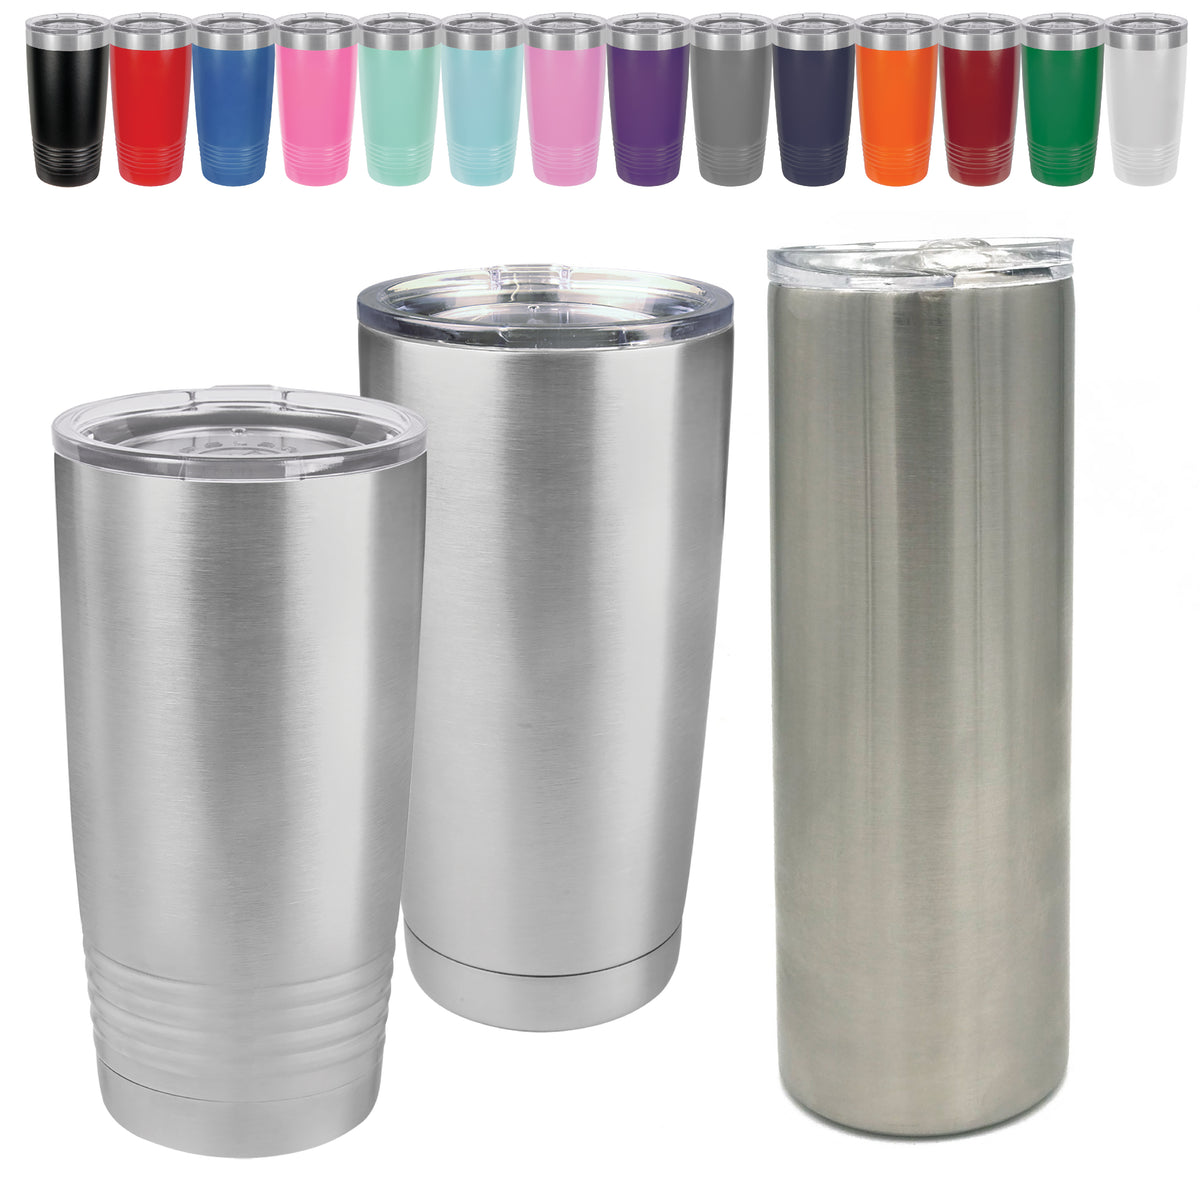 https://bulktumblers.com/cdn/shop/collections/20-oz-Blank-Stainless-Steel-Tumblers-Insulated-Metal-Cups-and-Wine-Glasses_1200x1200.jpg?v=1549145983